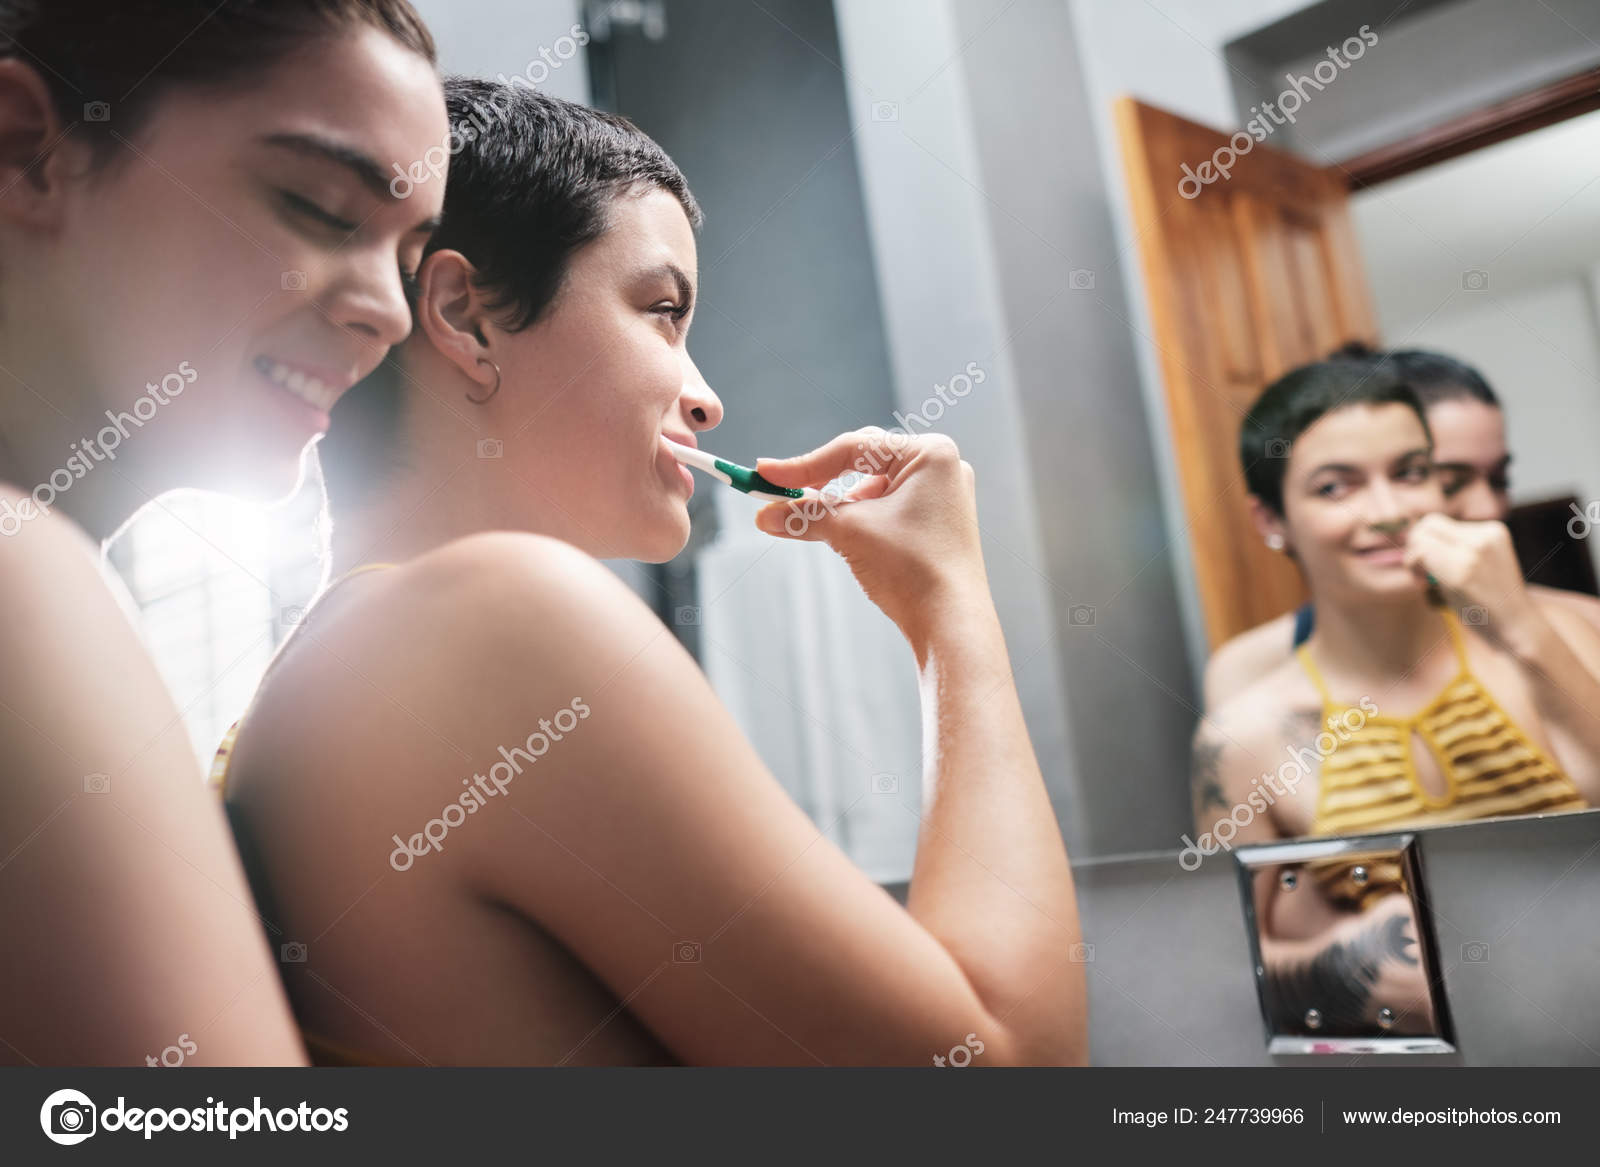 young lesbians in the shower